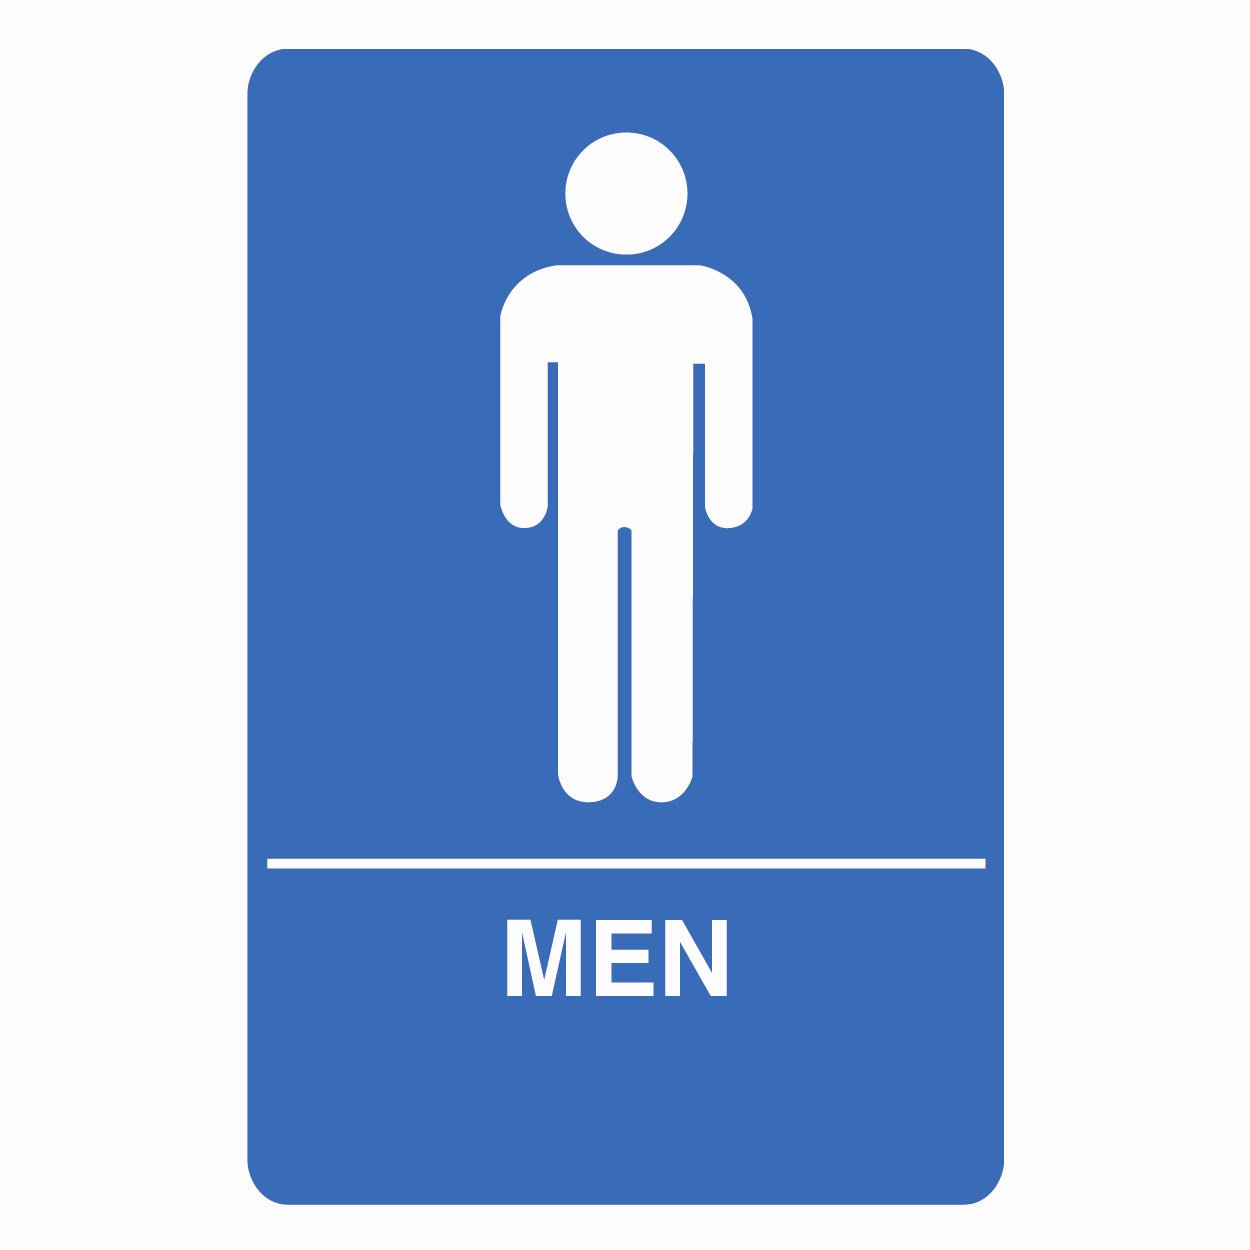 Male Toilet Sign Images - ClipArt Best